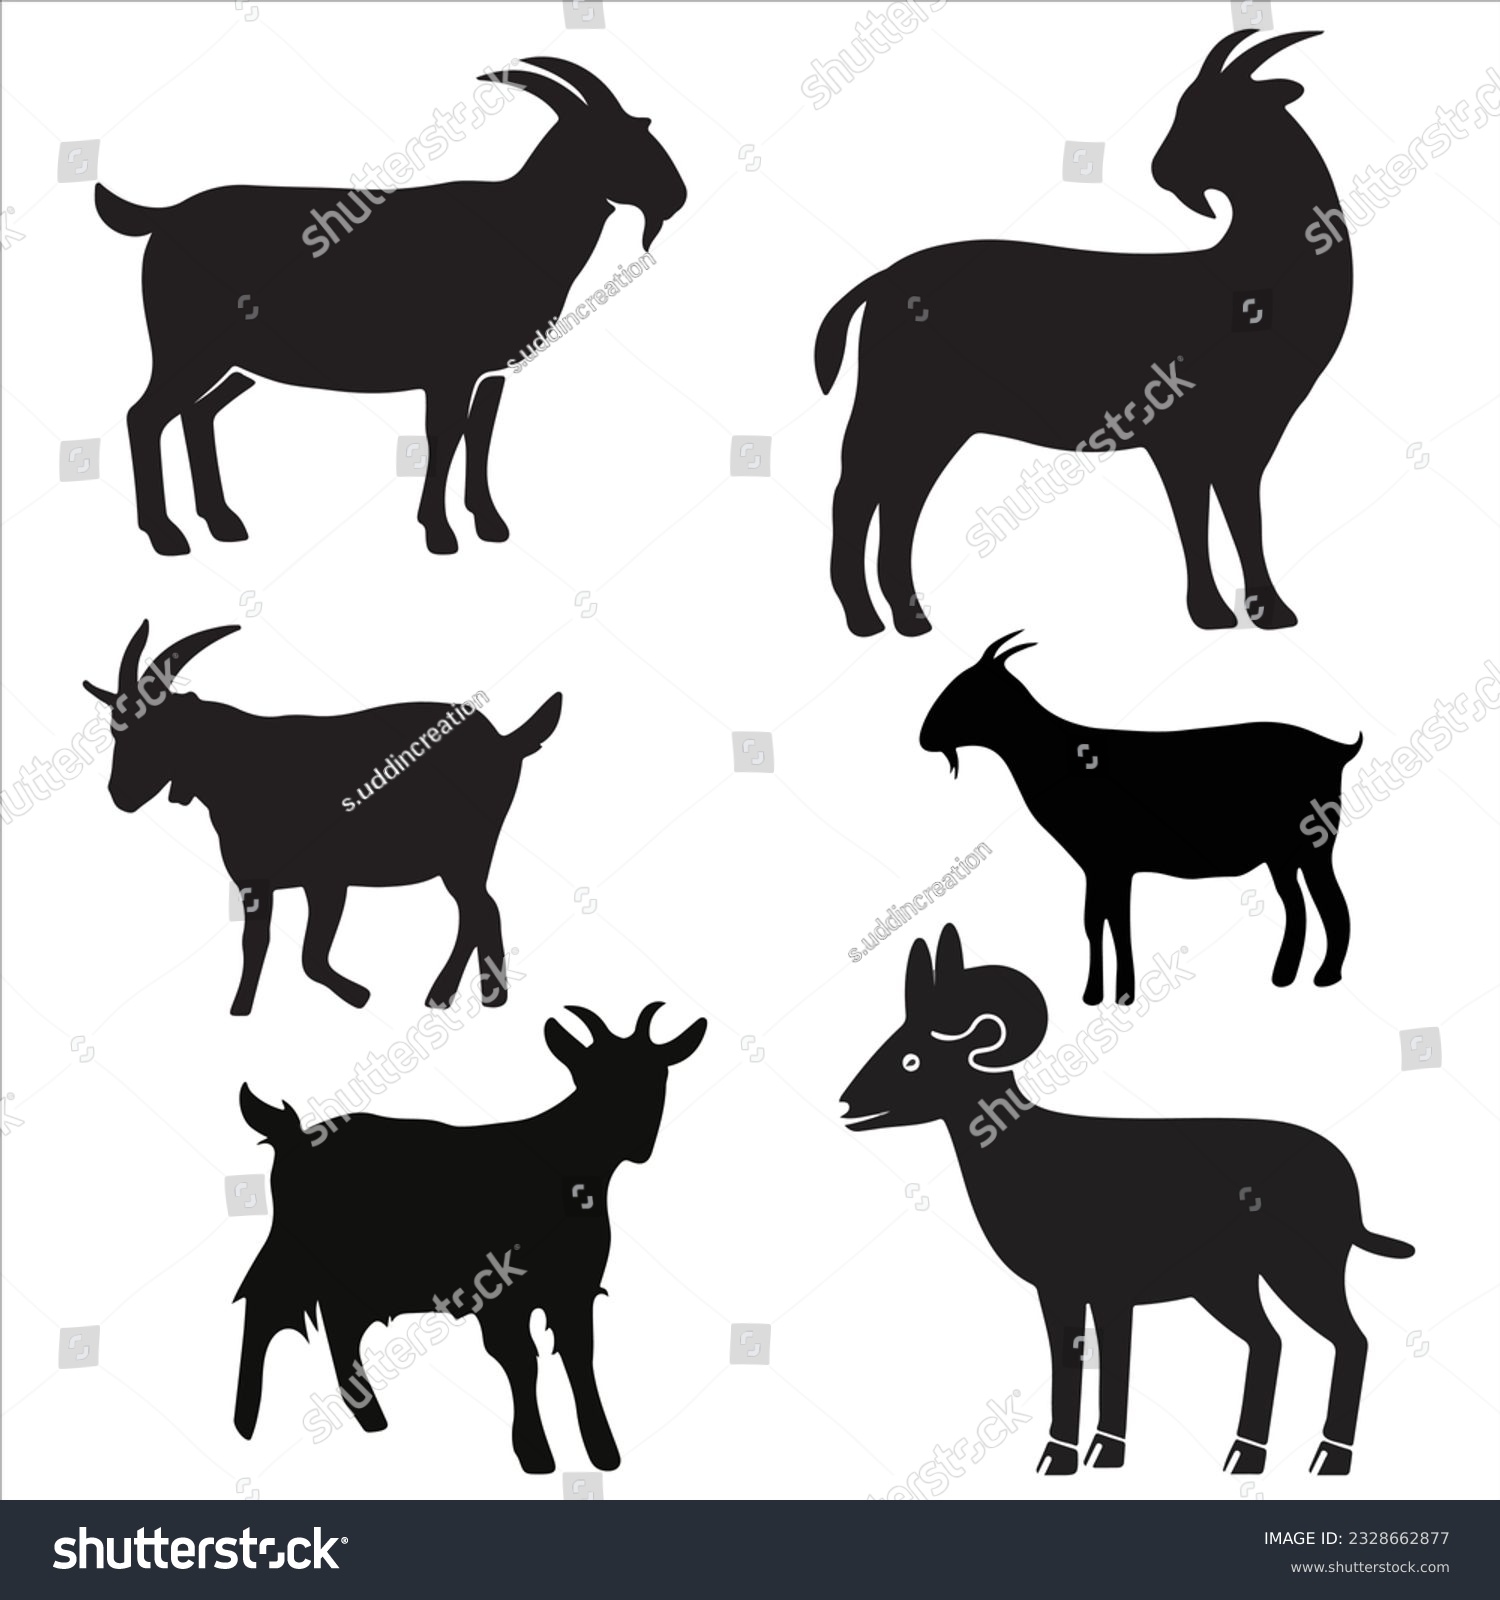 SVG of Goat Silhouette Set illustration with white background. svg